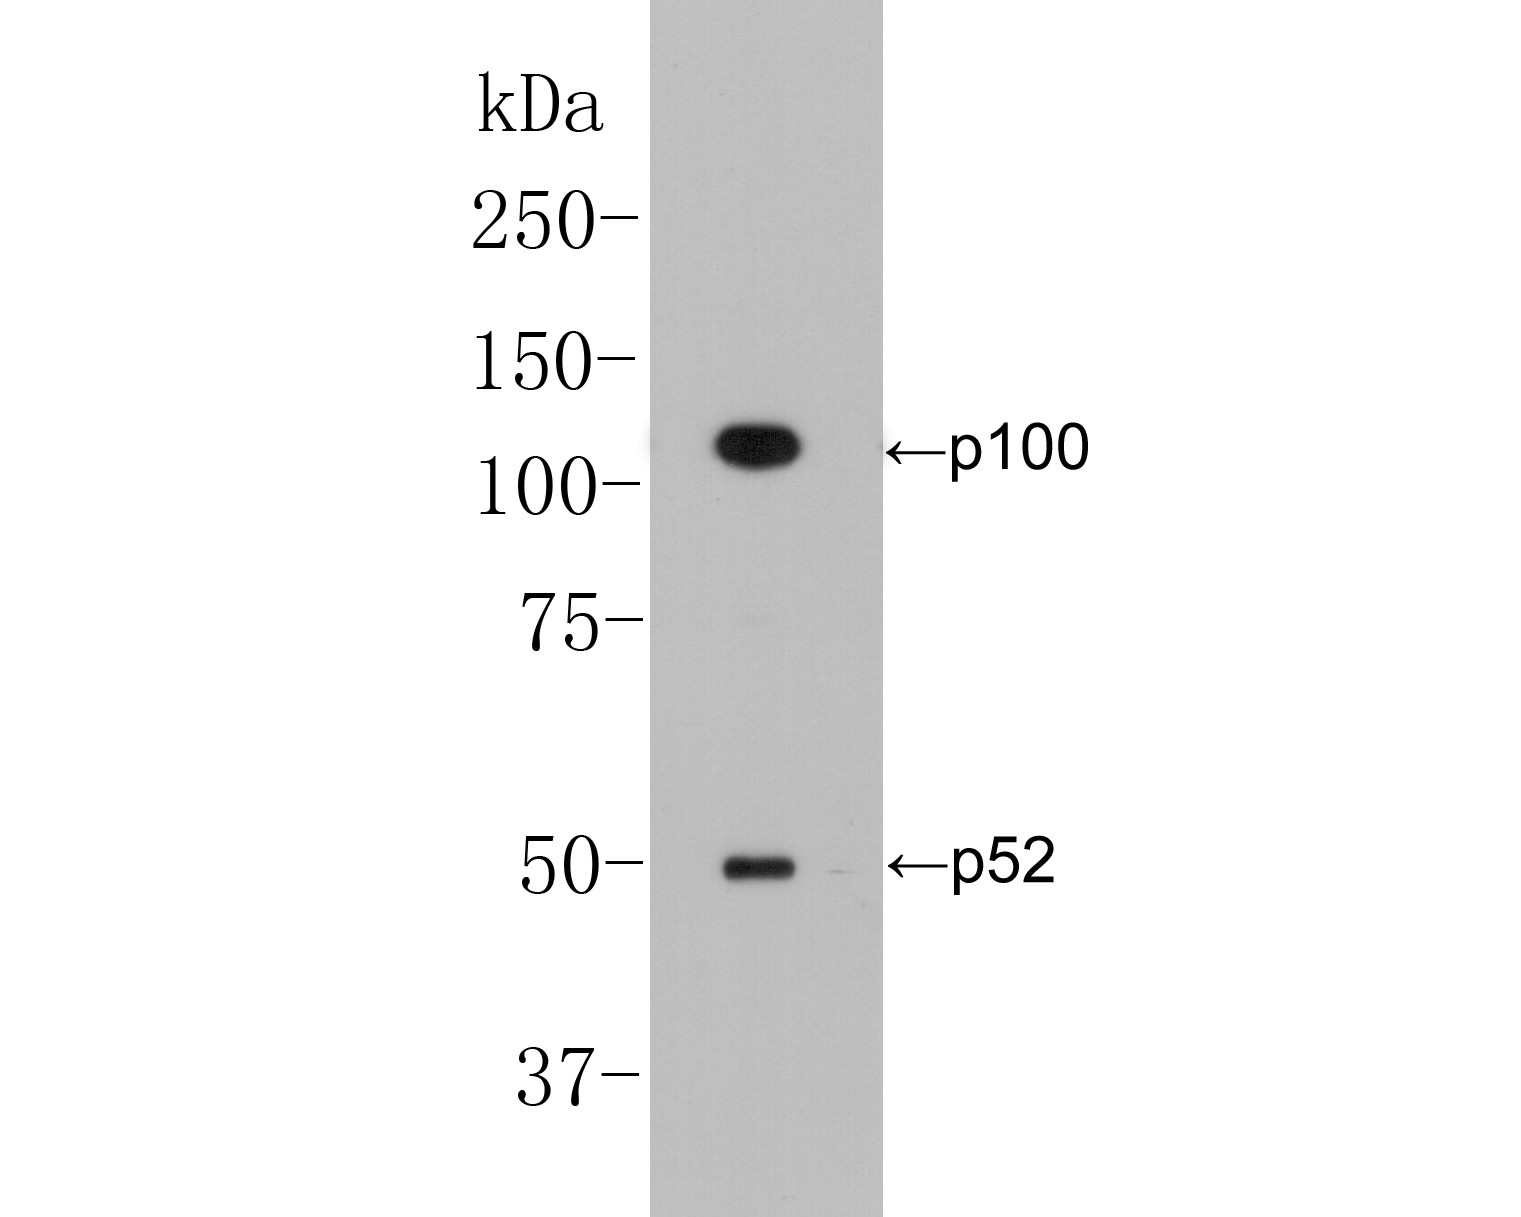 Western blot analysis of NFKB2 on Siha cell lysate. Proteins were transferred to a PVDF membrane and blocked with 5% BSA in PBS for 1 hour at room temperature. The primary antibody (EM1901-78, 1/500) was used in 5% BSA at room temperature for 2 hours. Goat Anti-Mouse IgG - HRP Secondary Antibody (HA1006) at 1:5,000 dilution was used for 1 hour at room temperature.<br />
Predicted band size: 97 kDa<br />
Observed band size: 52/100 kDa